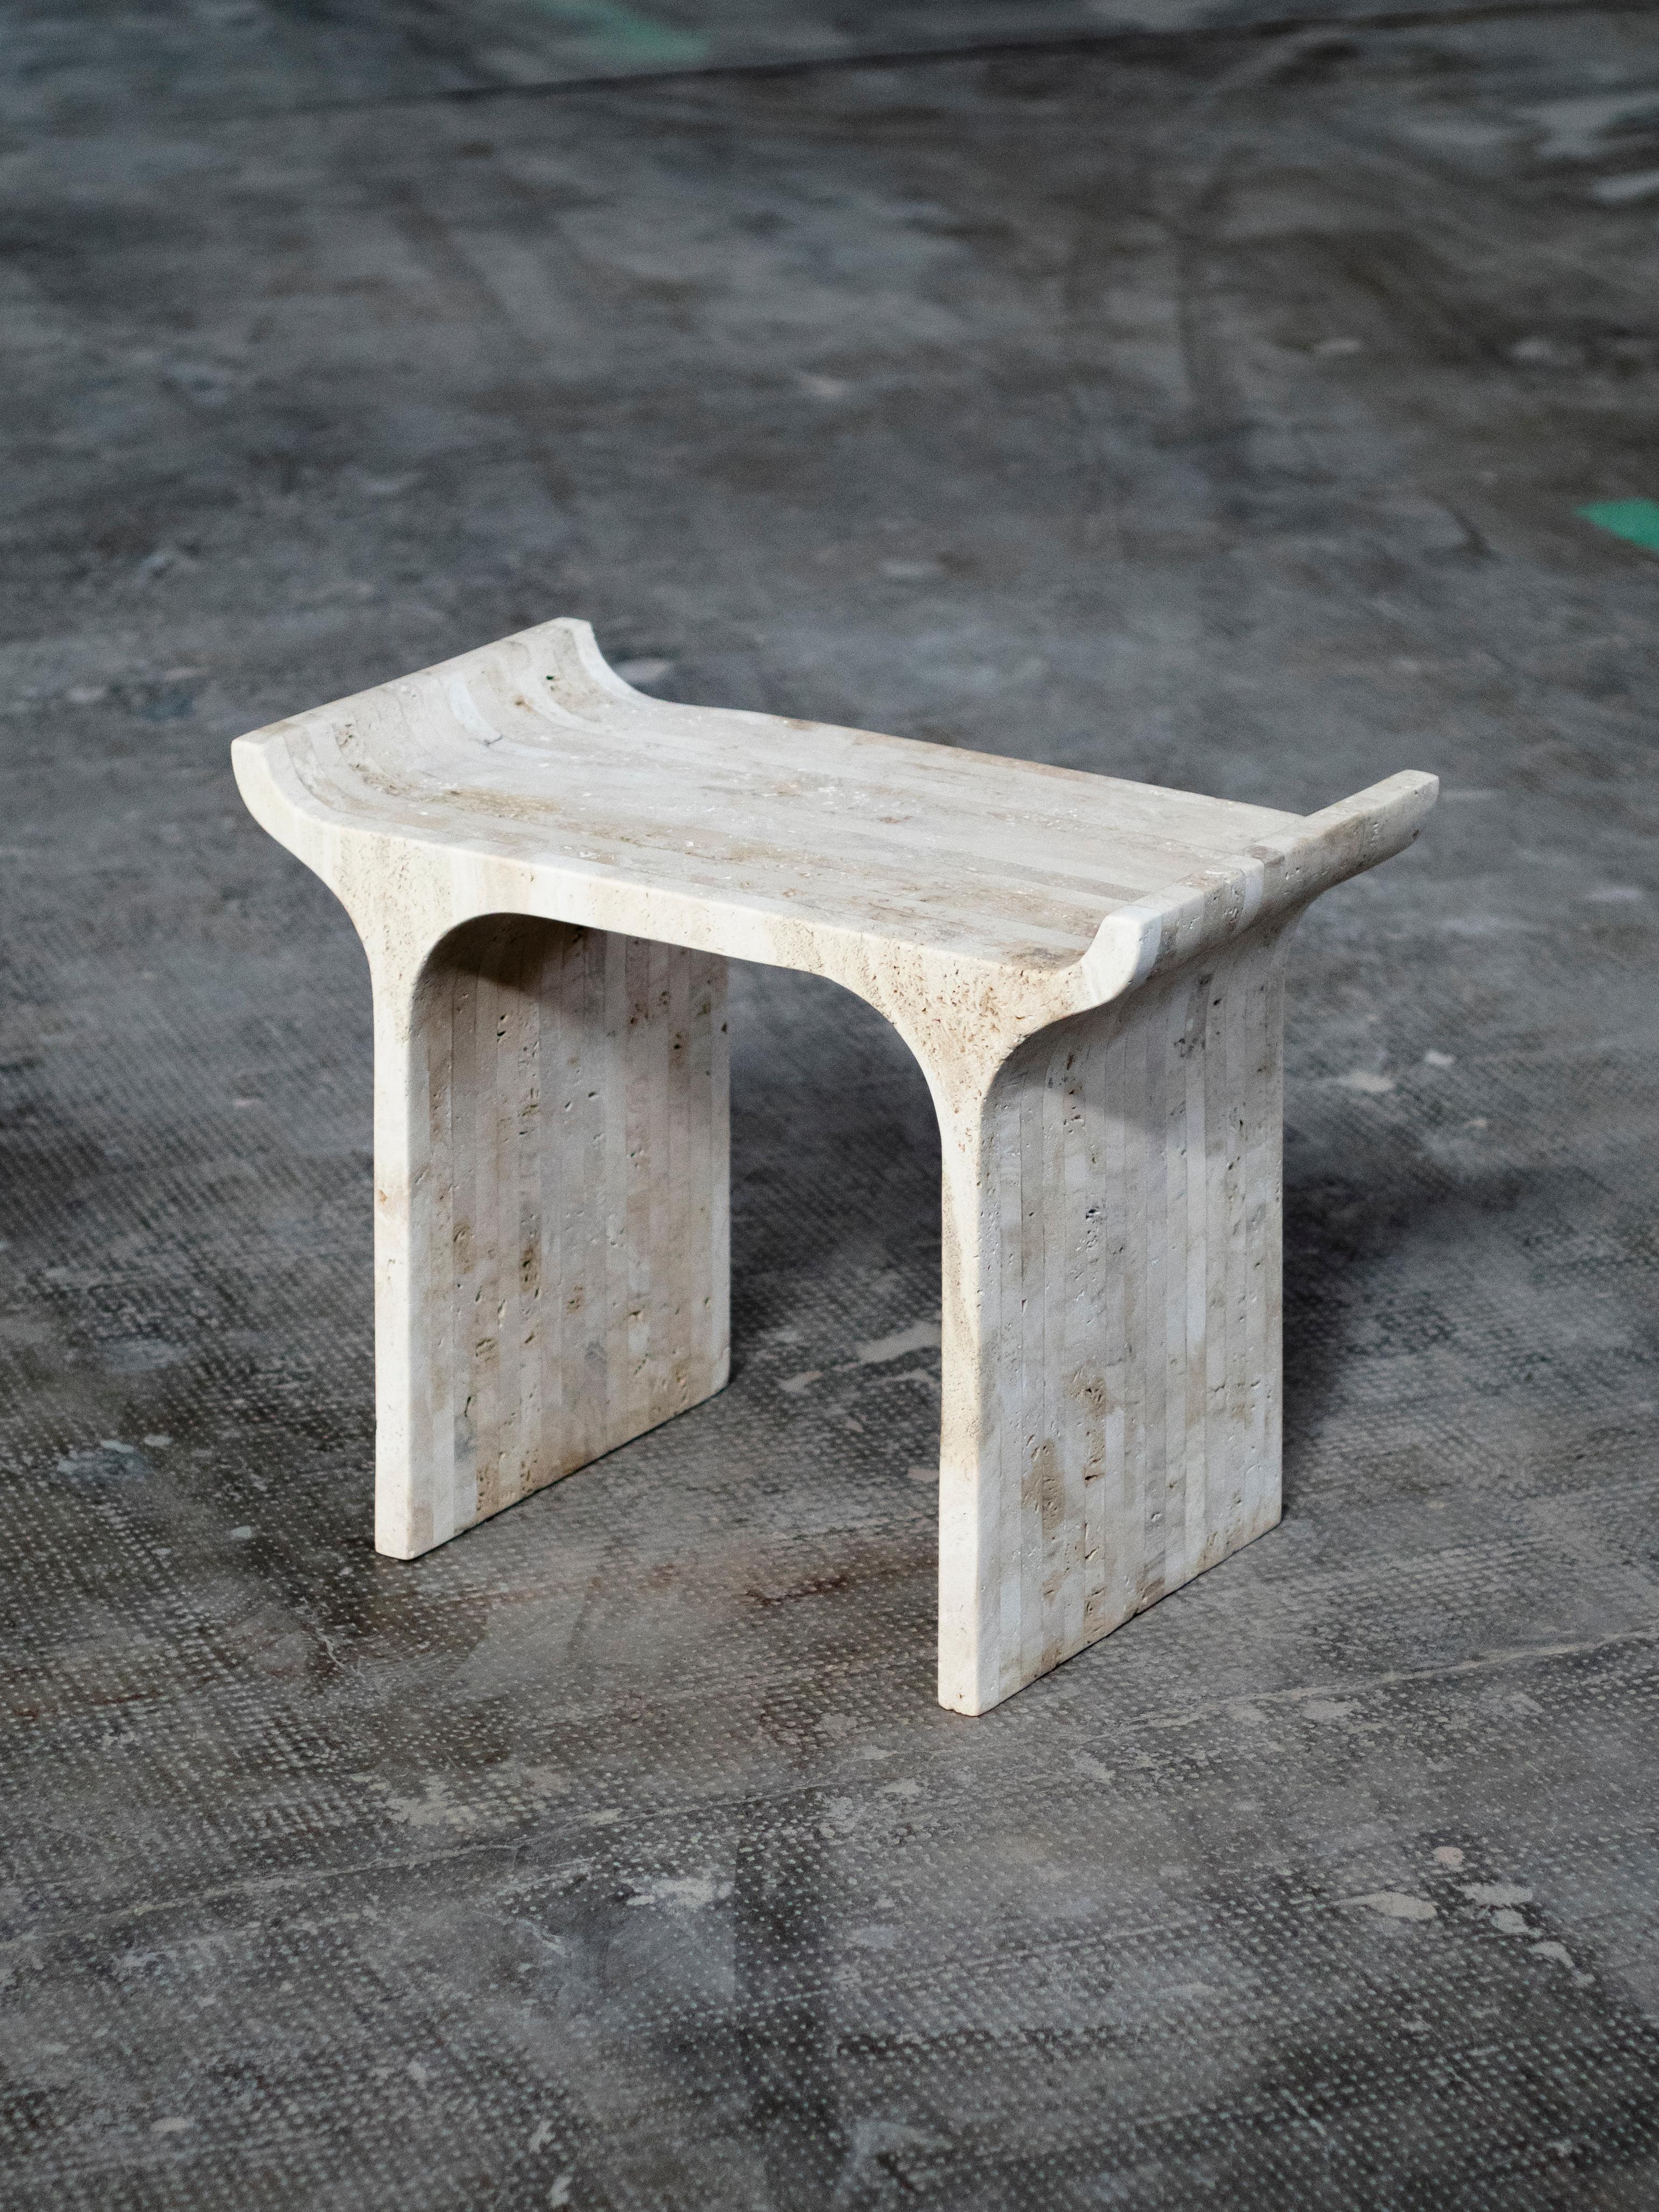 Tori stool Travertine by Ries
Dimensions: W60 x D30 x H44 cm 
Materials: Travertine

Also Available: Tori Stool Sand Cast Aluminum.

Ries is a design studio based in Buenos Aires, Argentina, focused on product and conemporary furniture design. The